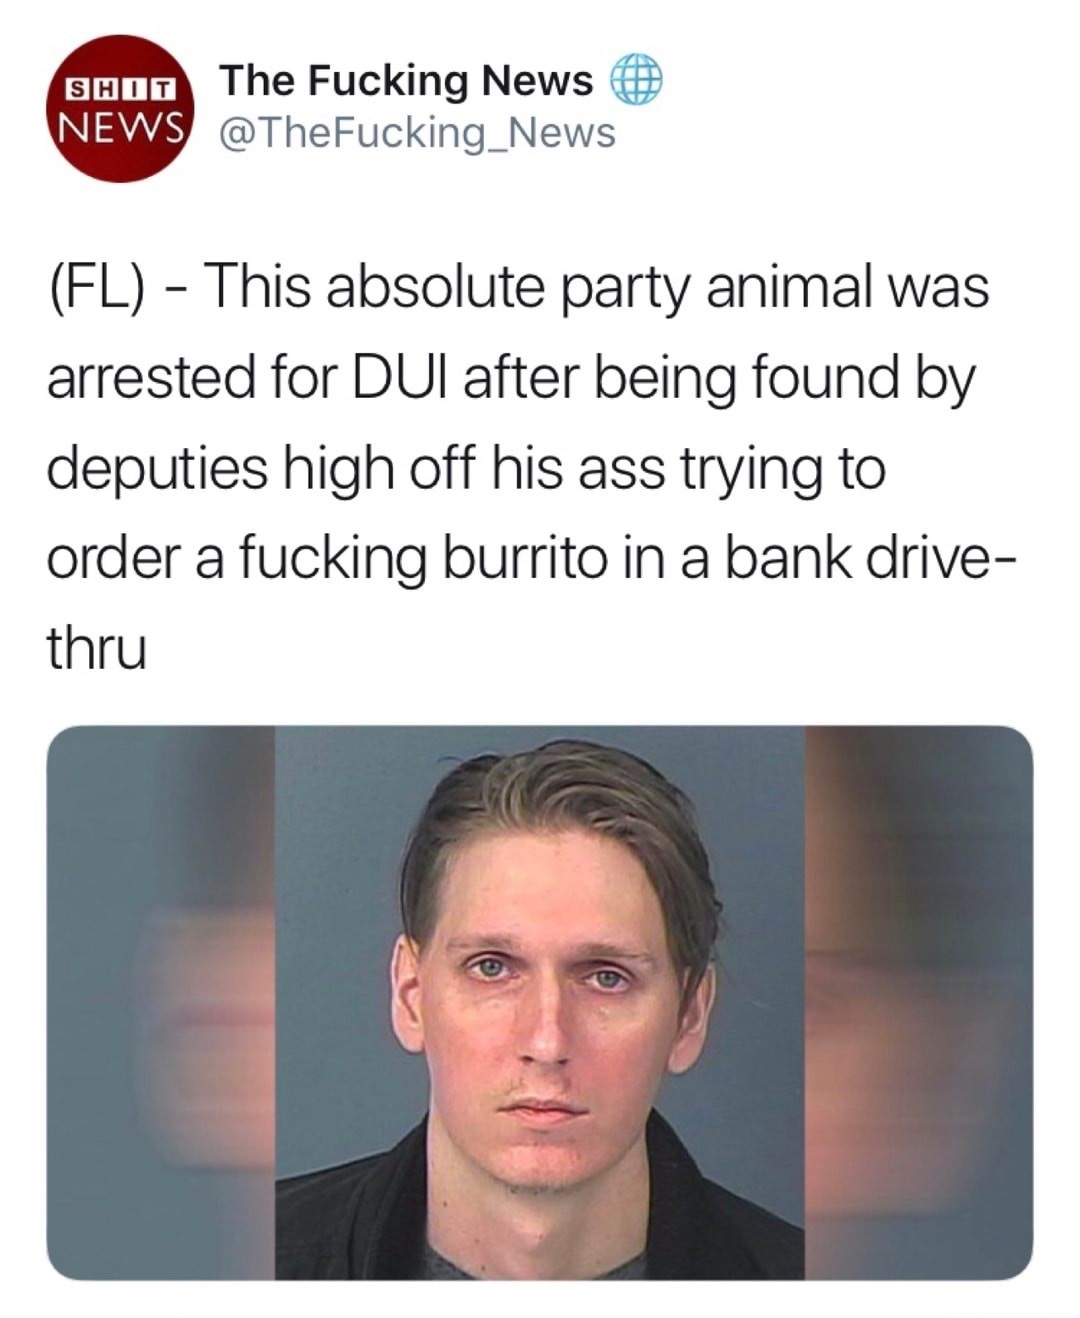 jaw - Shot The Fucking News News Fl This absolute party animal was arrested for Dui after being found by deputies high off his ass trying to order a fucking burrito in a bank drive thru